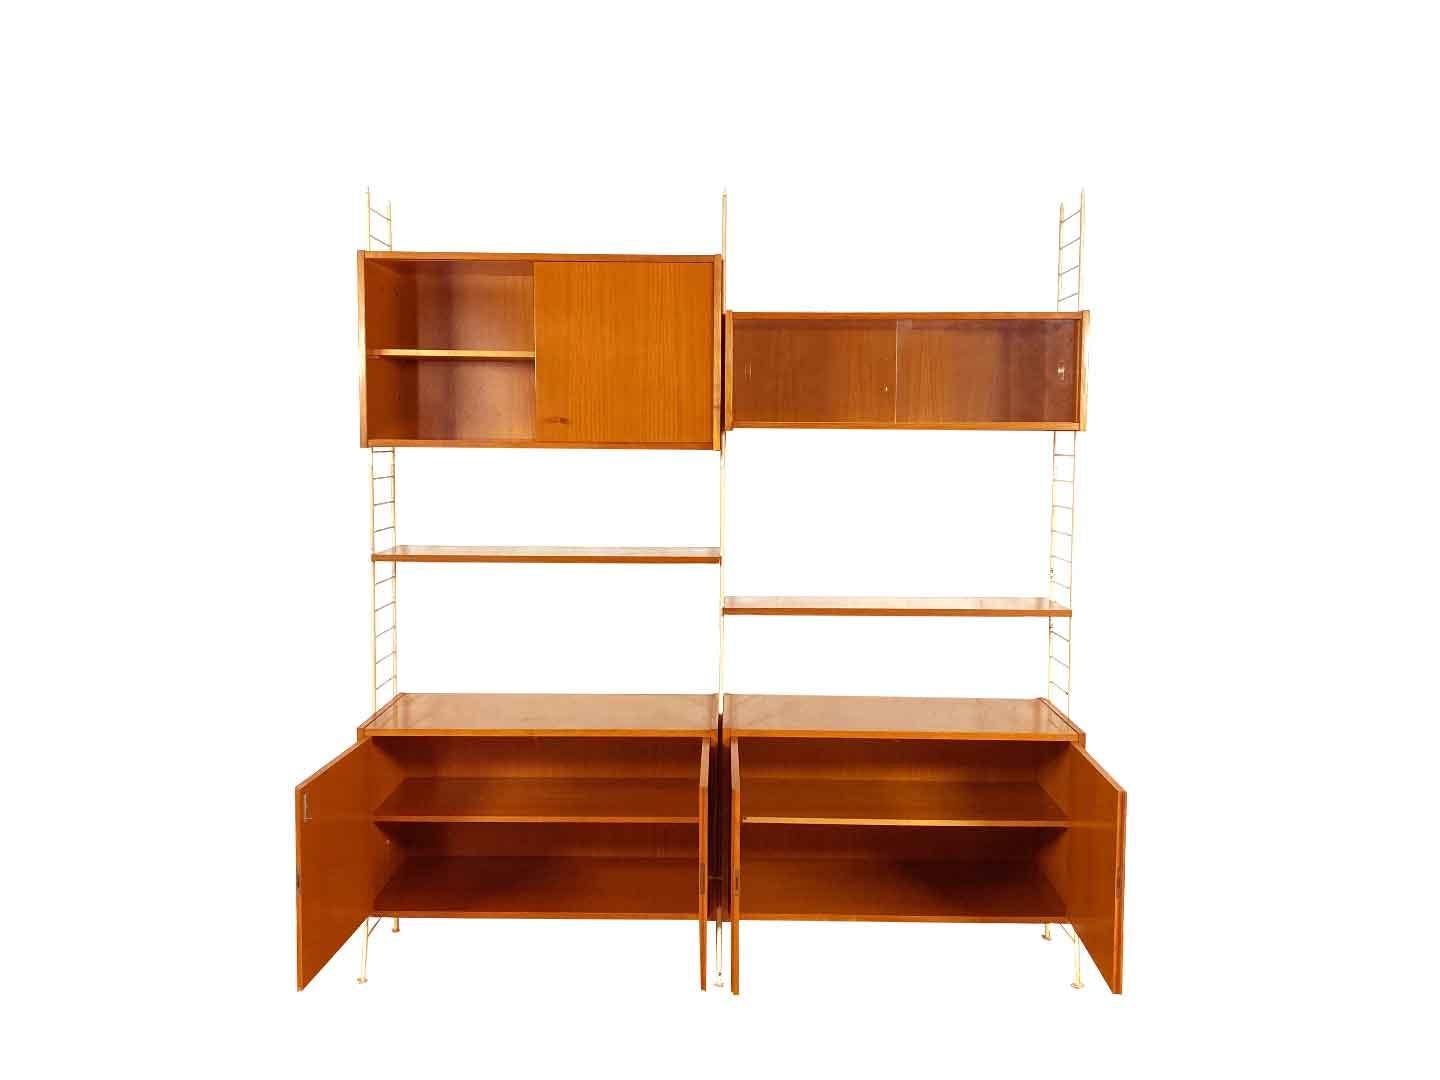 Vintage Sybille System DDR wall system produced by VEB Möbelwerk Stralsund in Germany (GDR) in the 1960s. Based on the function and design of the famous Swedish shelf system, System furniture also became popular in the GDR in the 1960s. The wall